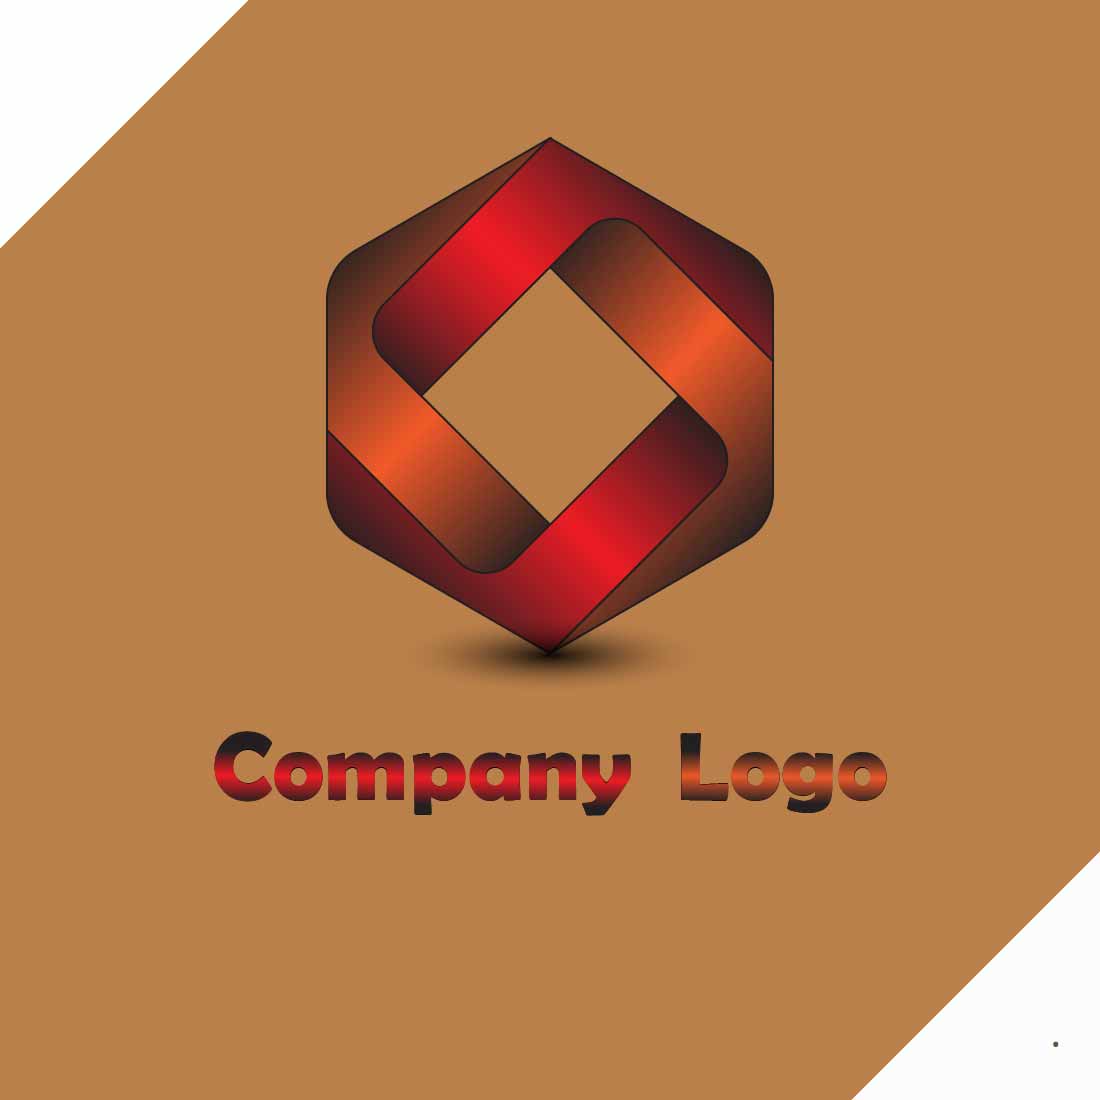 Professional Abstract Hexagonal Shape Logo Design cover image.